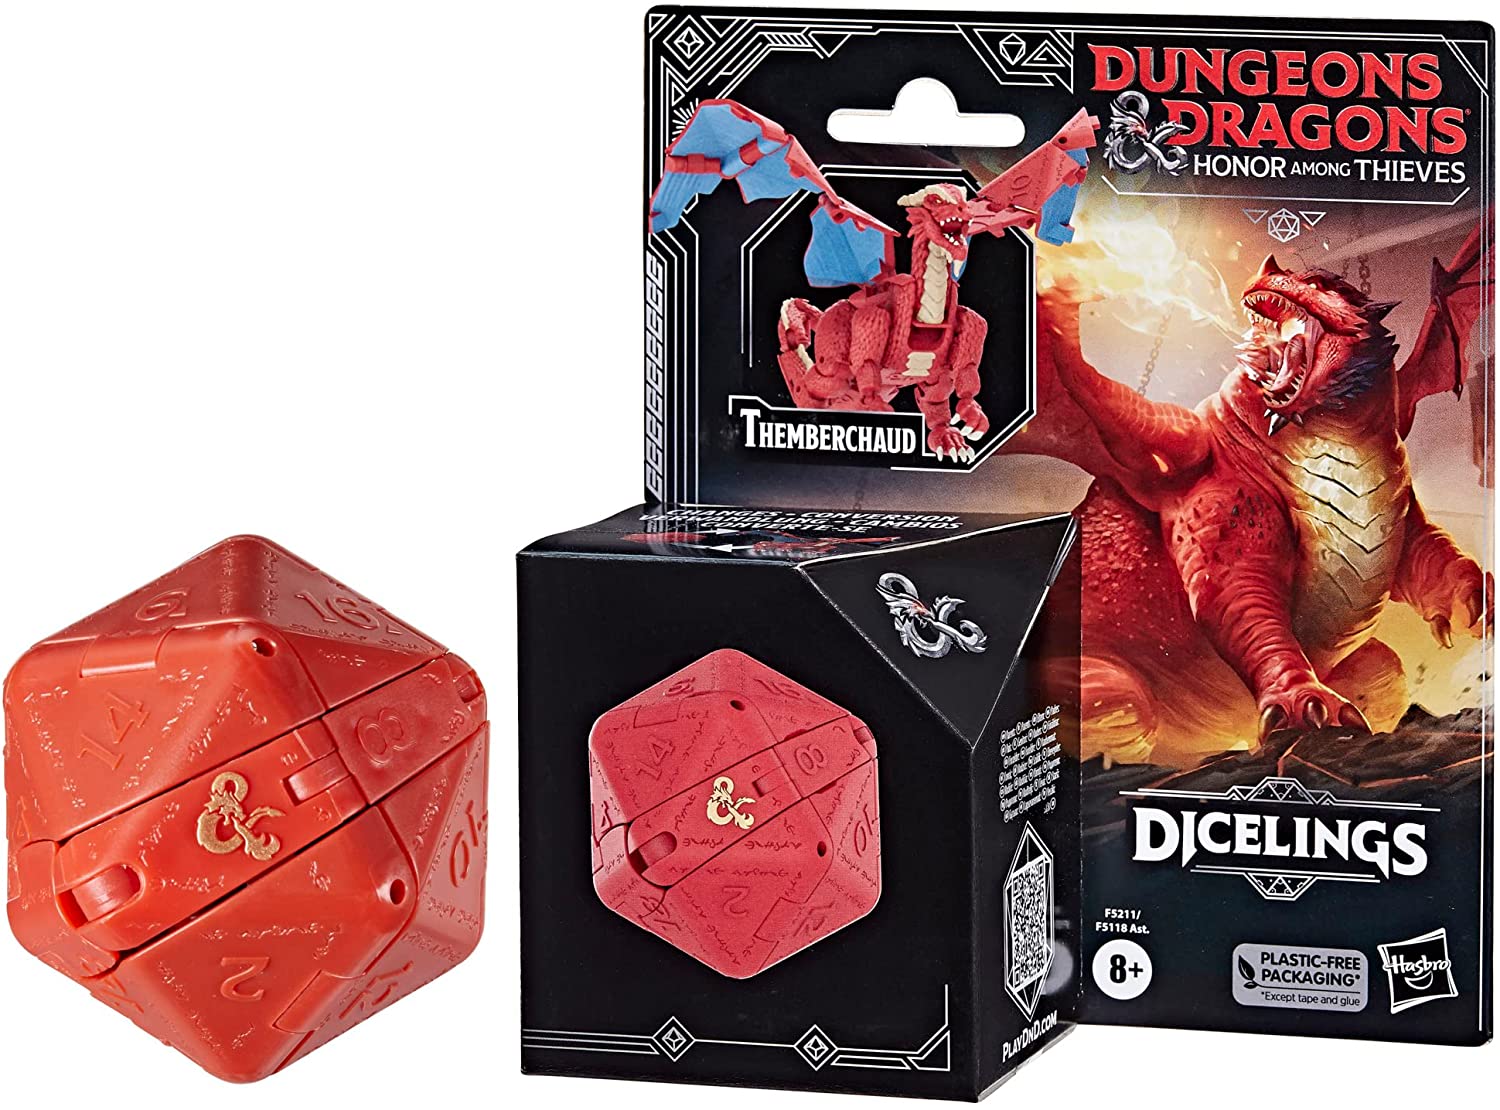 Dungeons & Dragons diceling Red Dragon